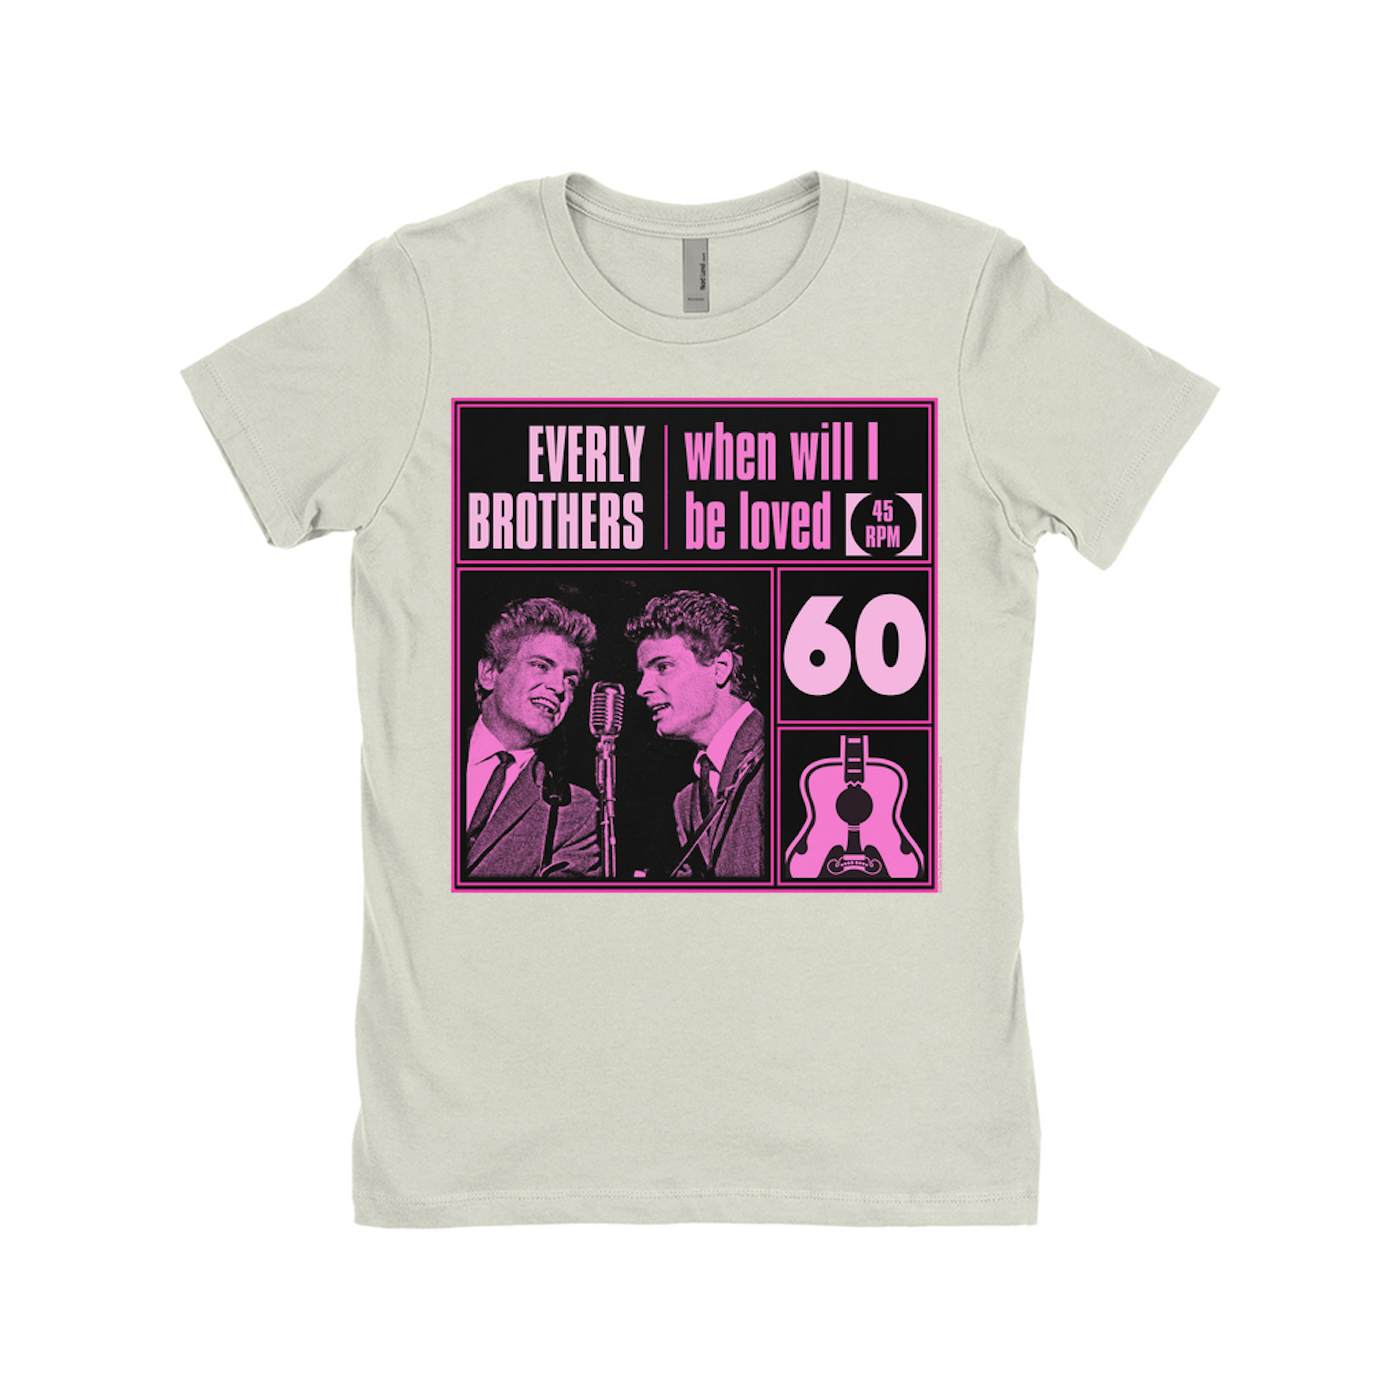 The Everly Brothers Ladies' Boyfriend T-Shirt | When Will I Be Loved Pink Black The Everly Brothers Shirt